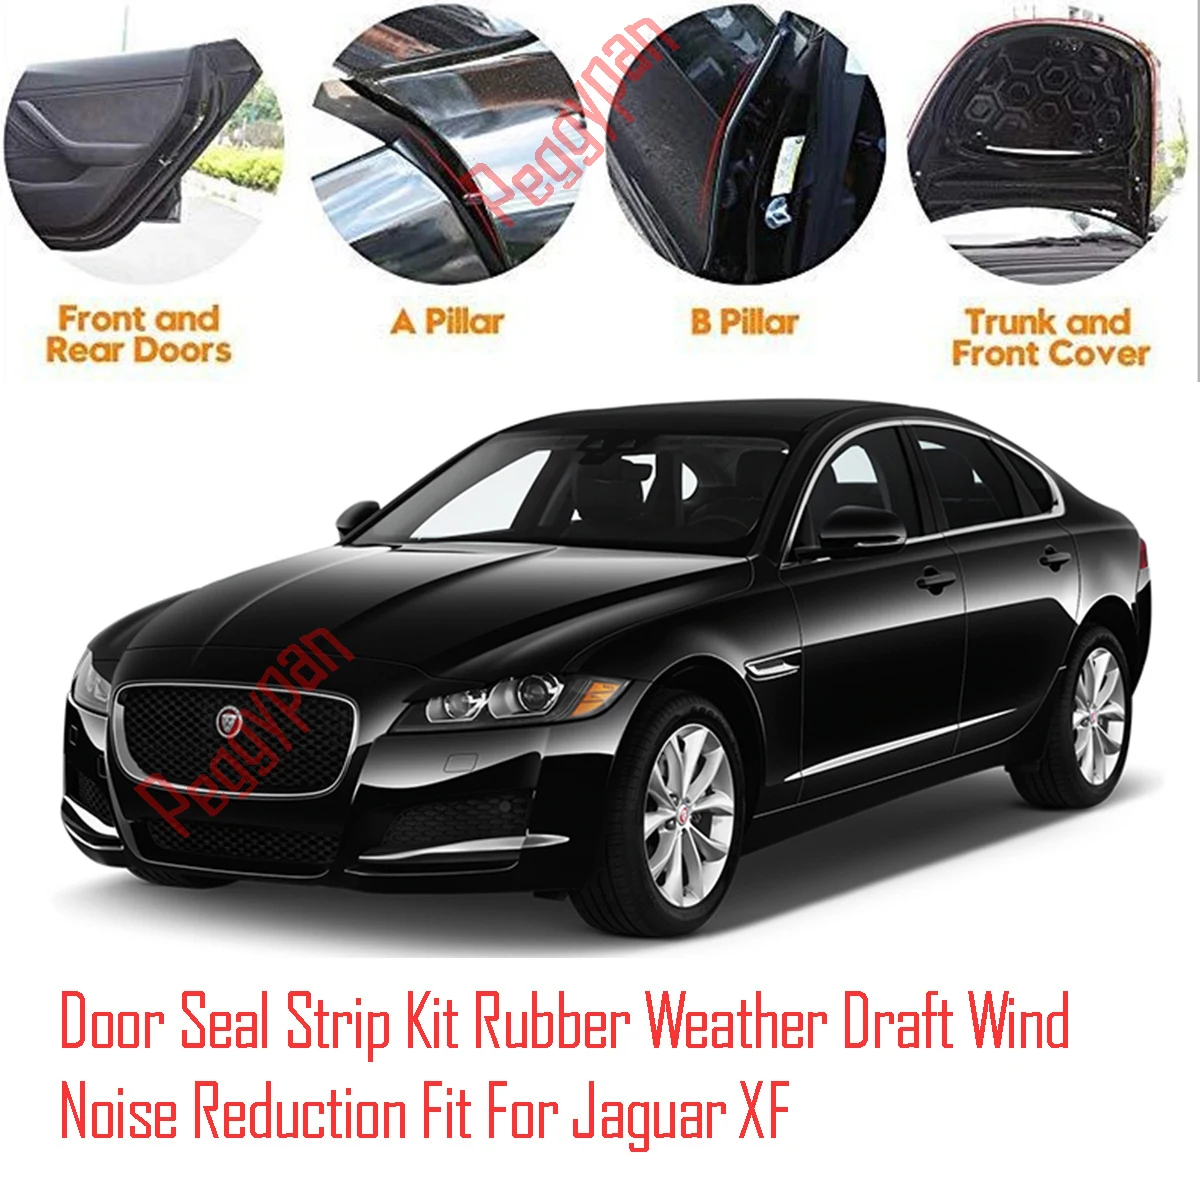 Door Seal Strip Kit Self Adhesive Window Engine Cover Soundproof Rubber Weather Draft Wind Noise Reduction Fit For Jaguar XF